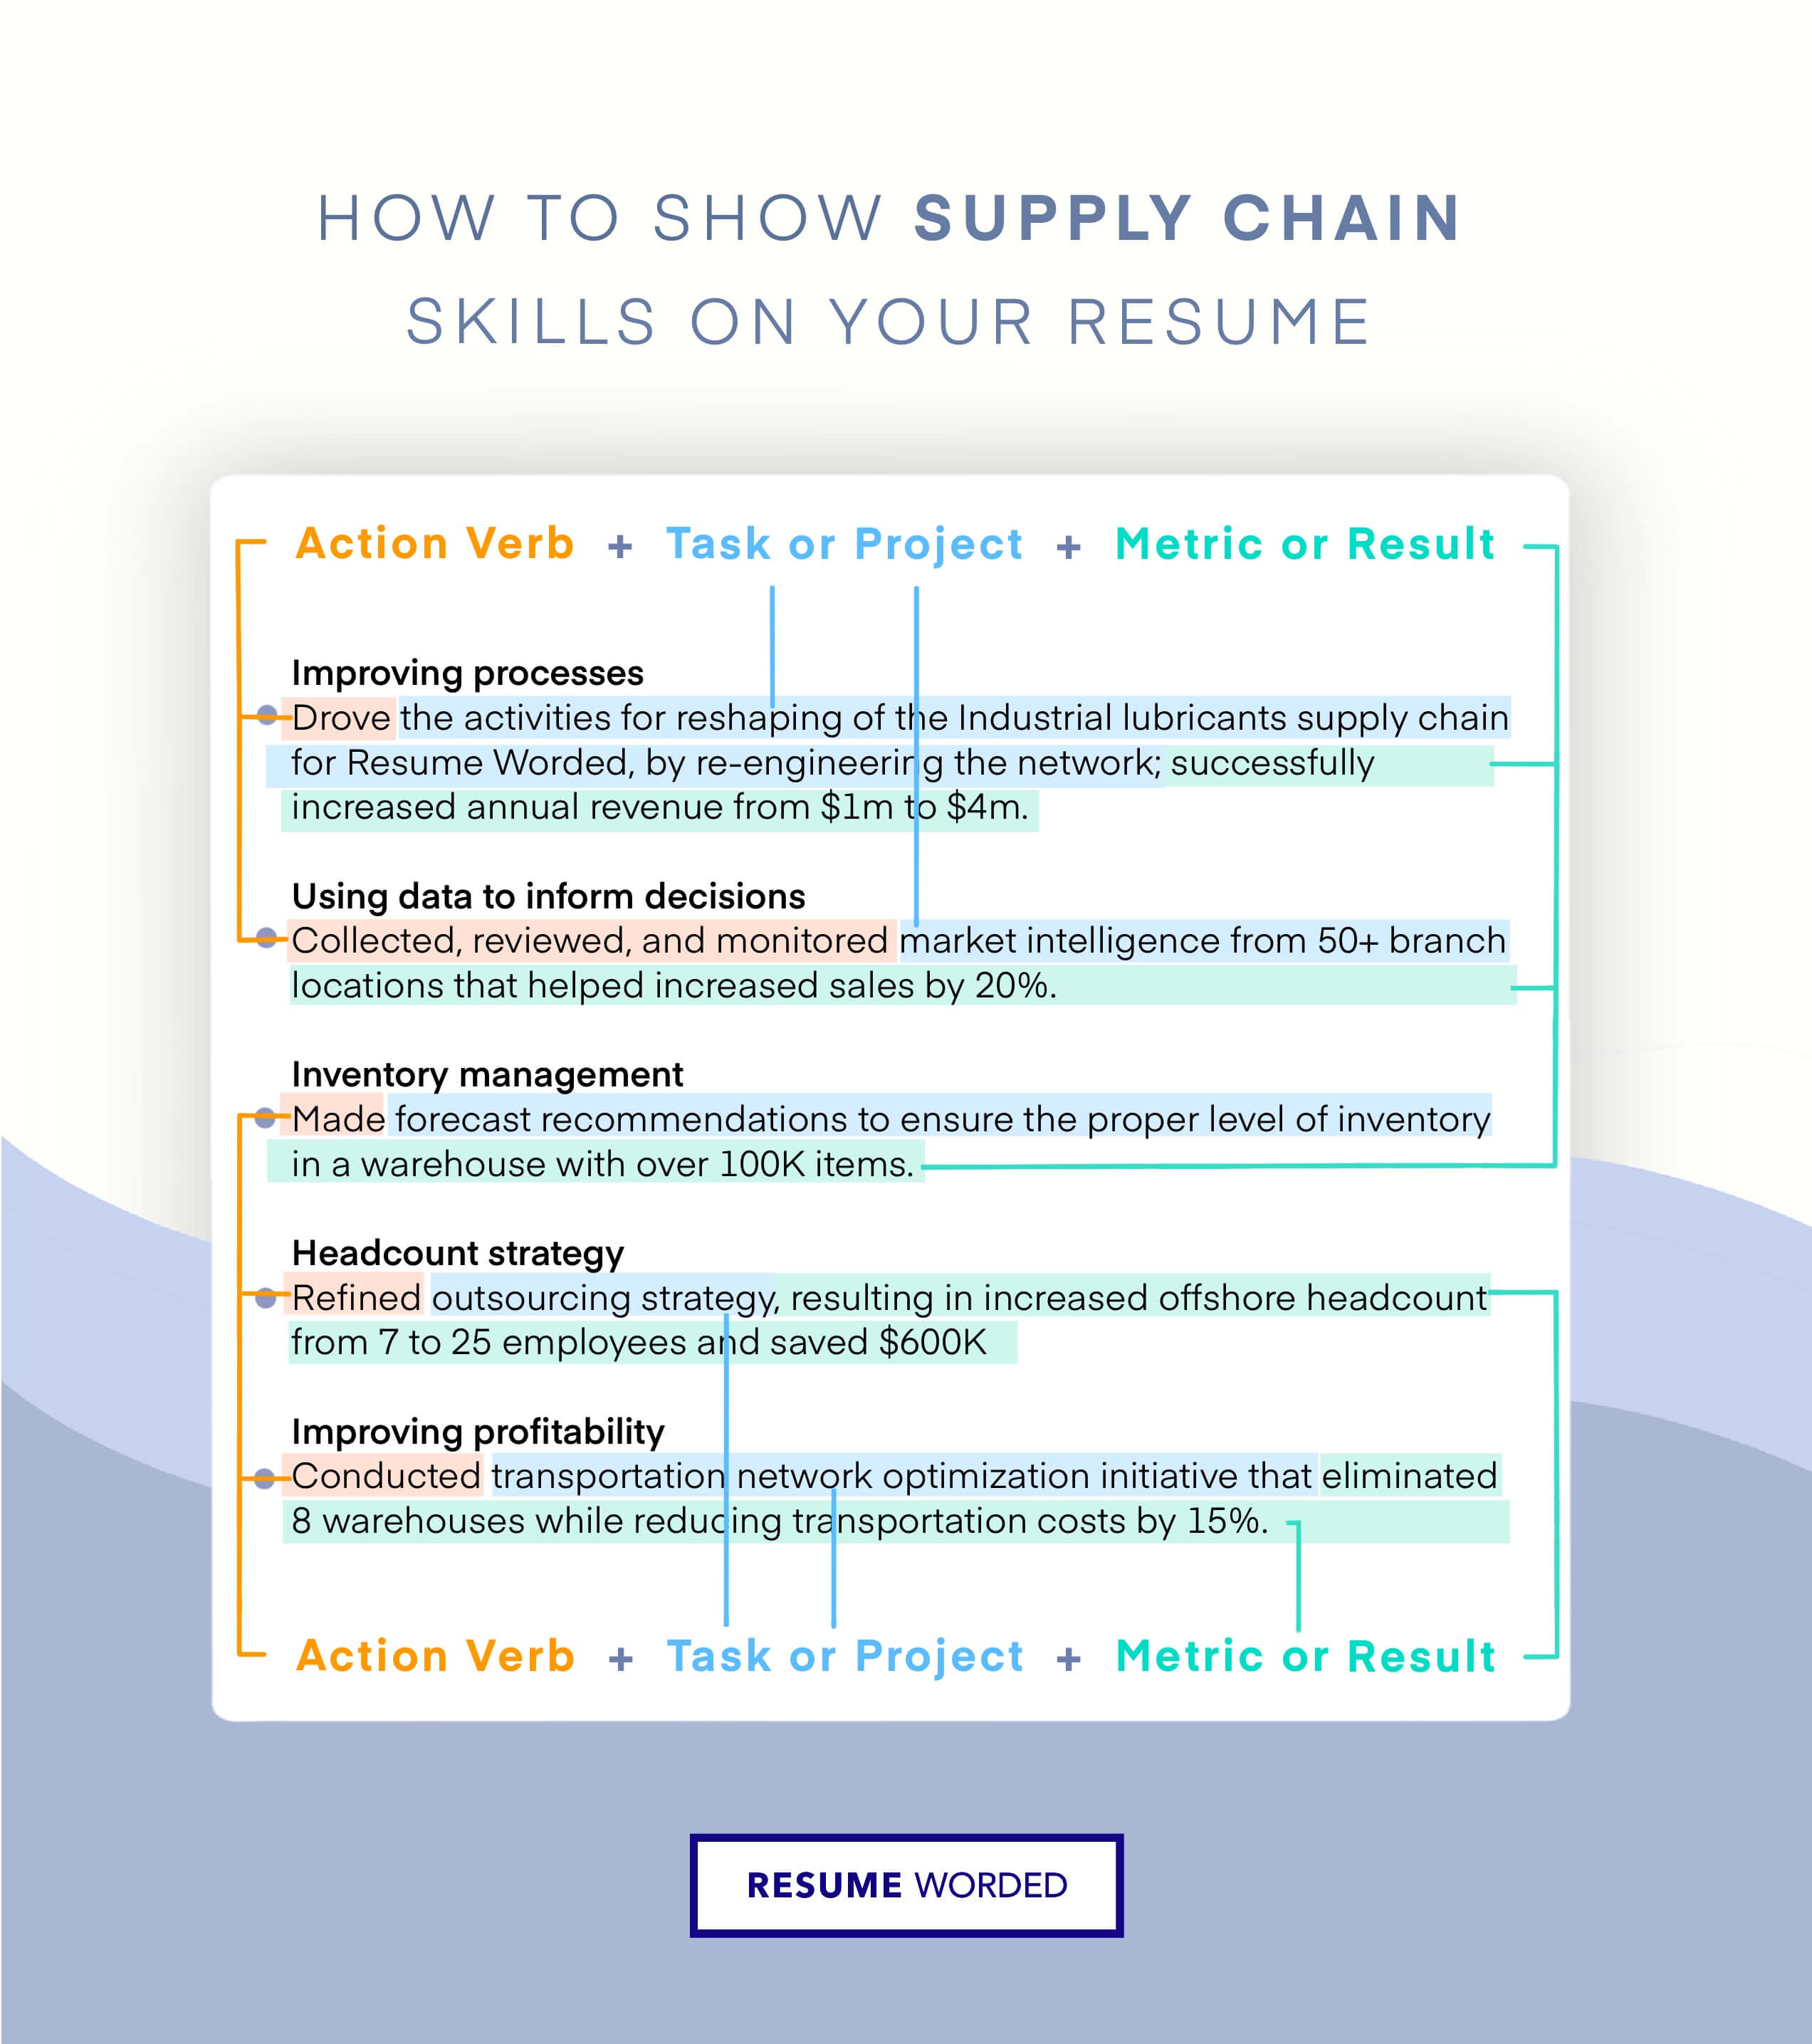 Showcase your expertise in digital supply chain tools - Planning and Supply Chain Specialist CV